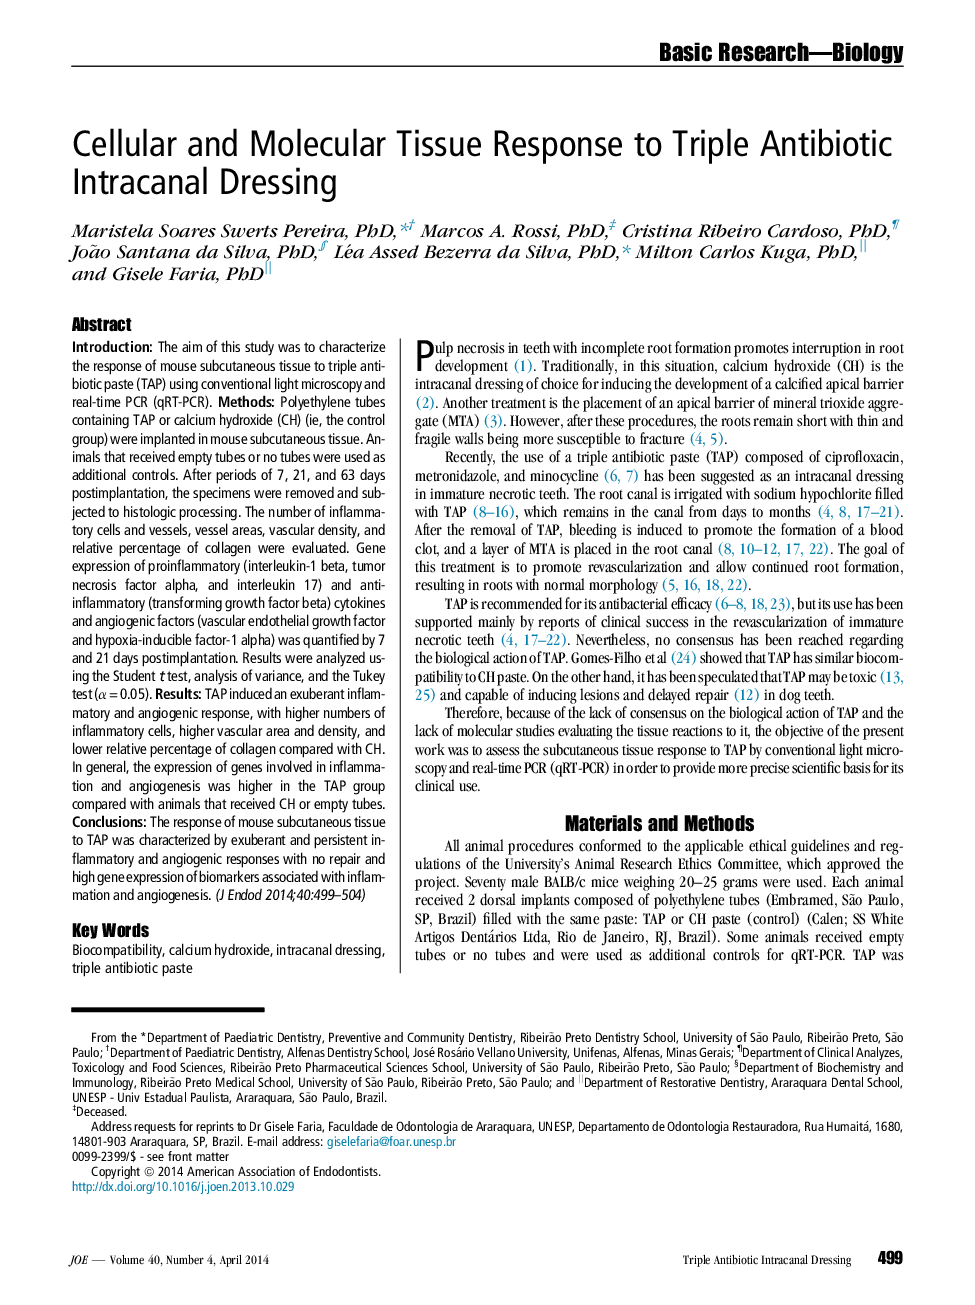 Cellular and Molecular Tissue Response to Triple Antibiotic Intracanal Dressing